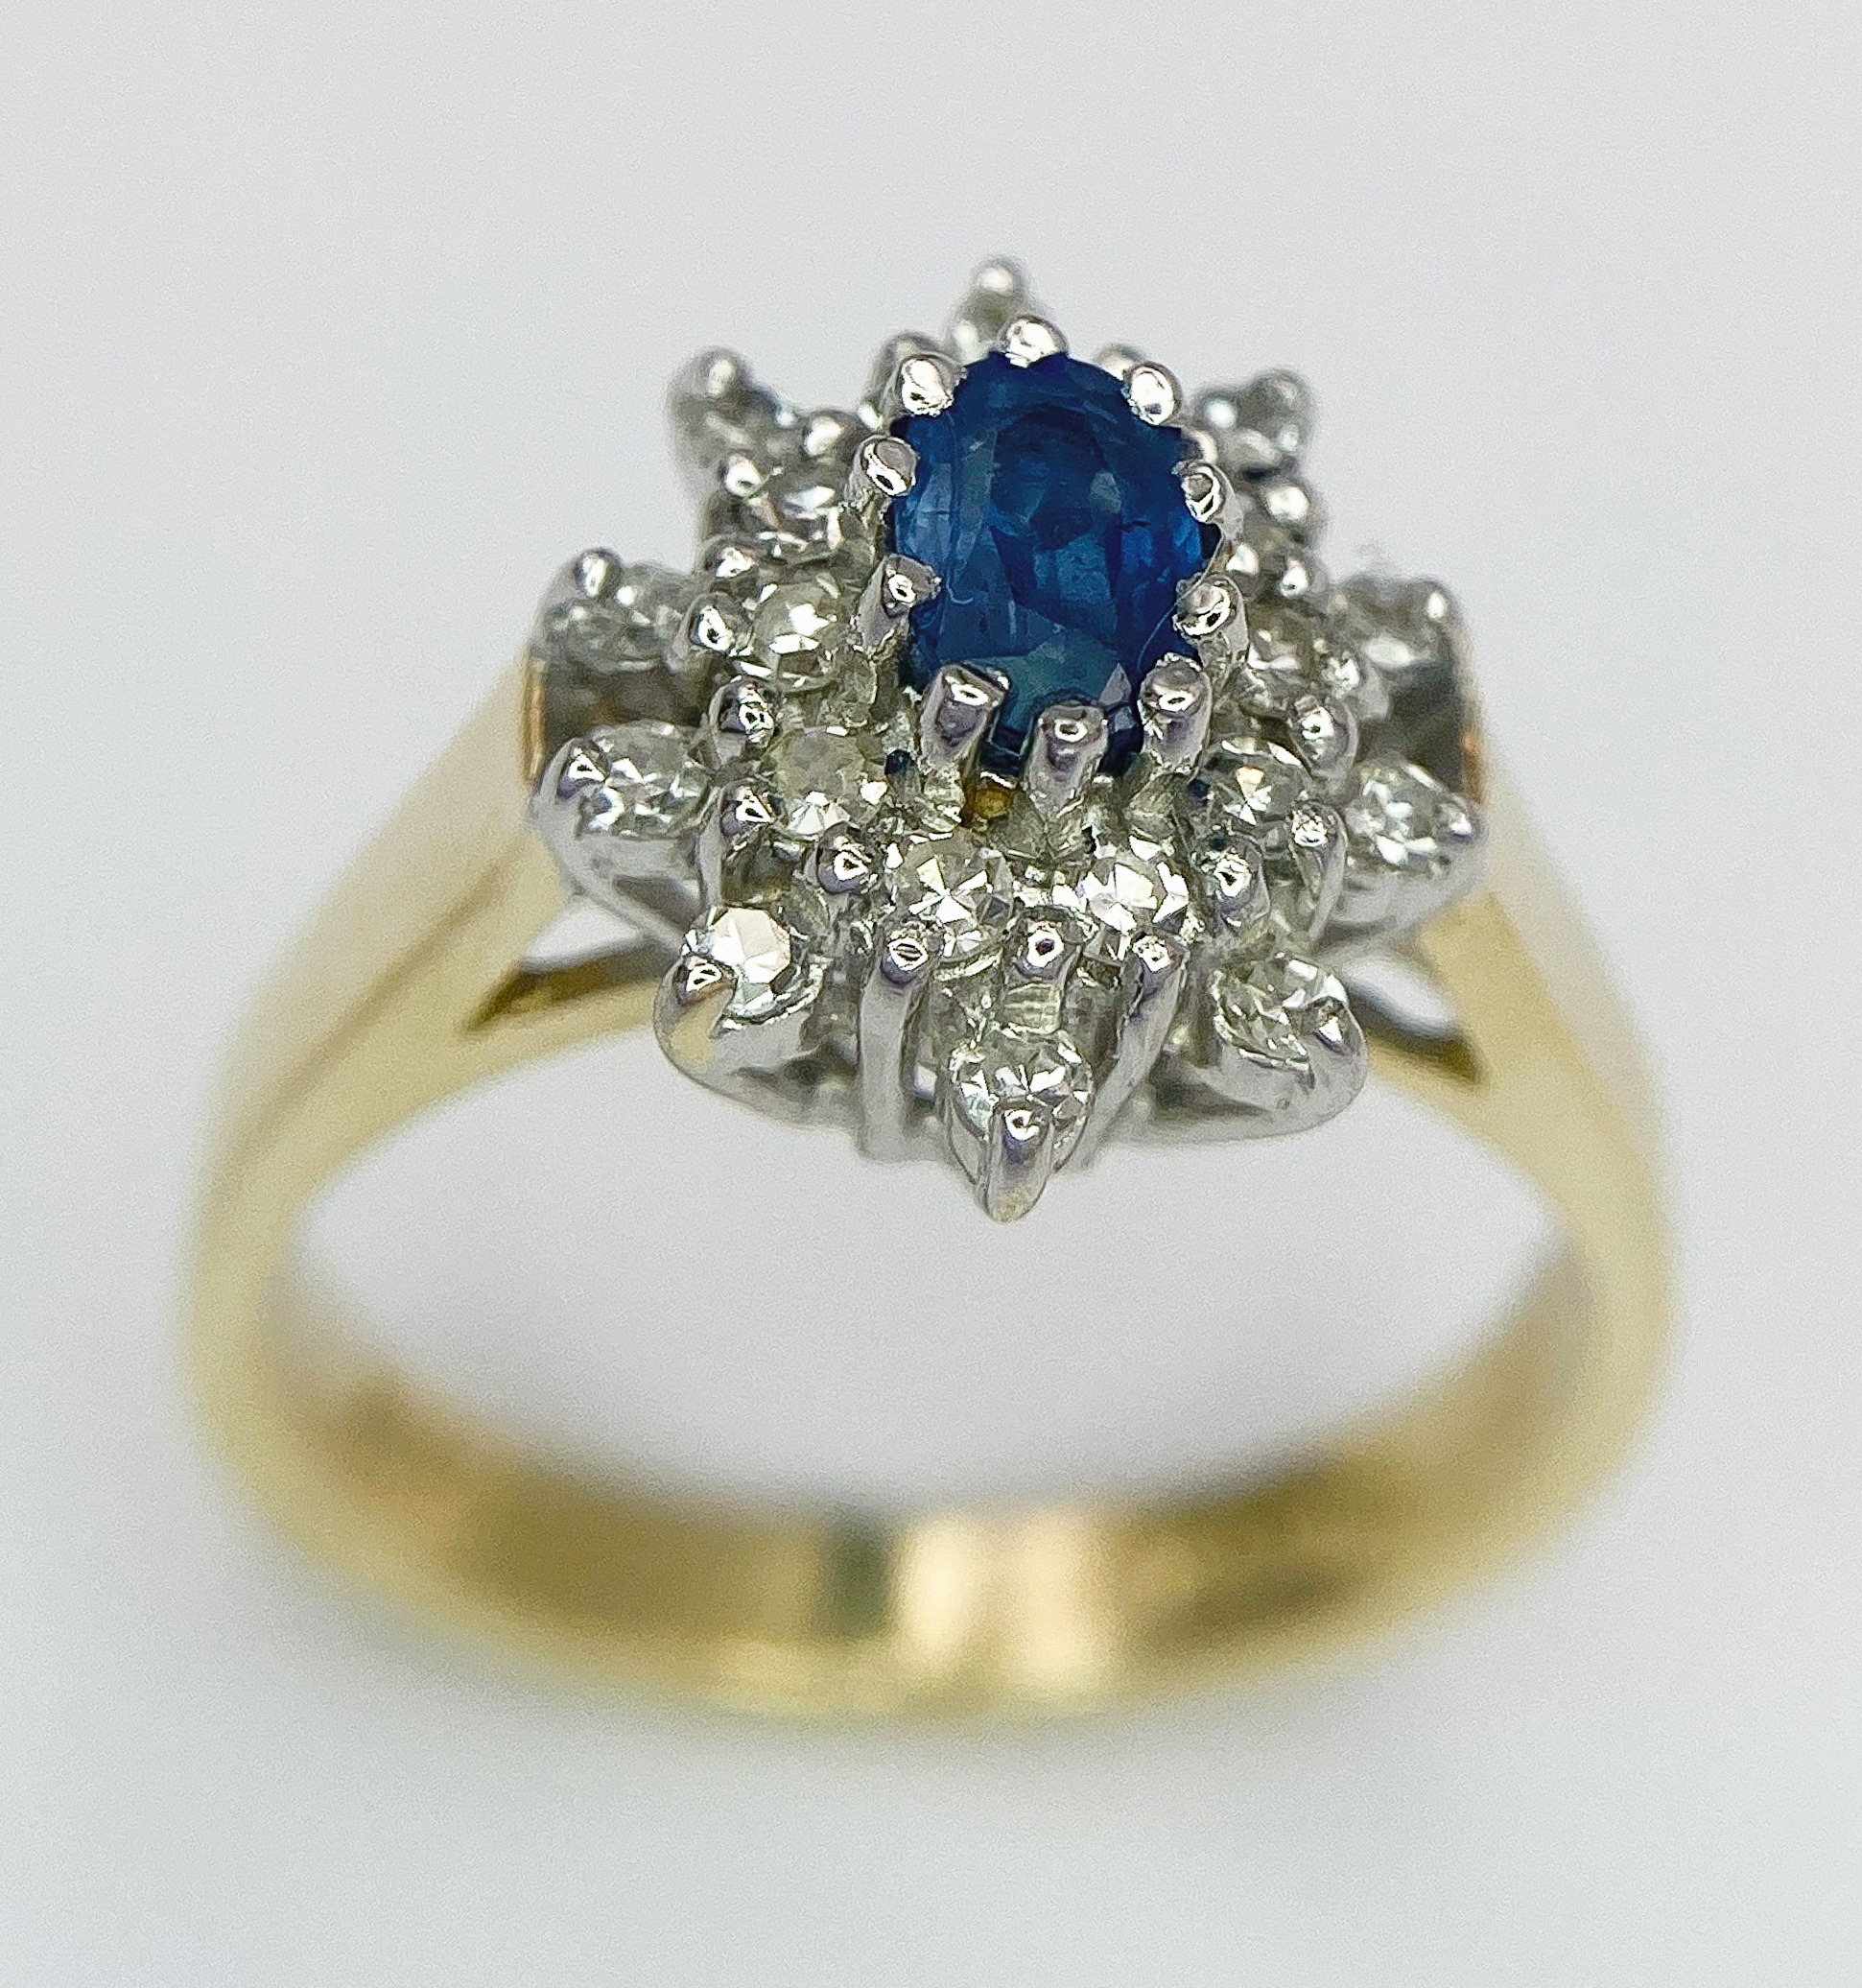 A 9K YELLOW GOLD DIAMOND & SAPPHIRE CLUSTER RING. Size J, 2.8g total weight. Ref: SC 8030 - Image 2 of 4